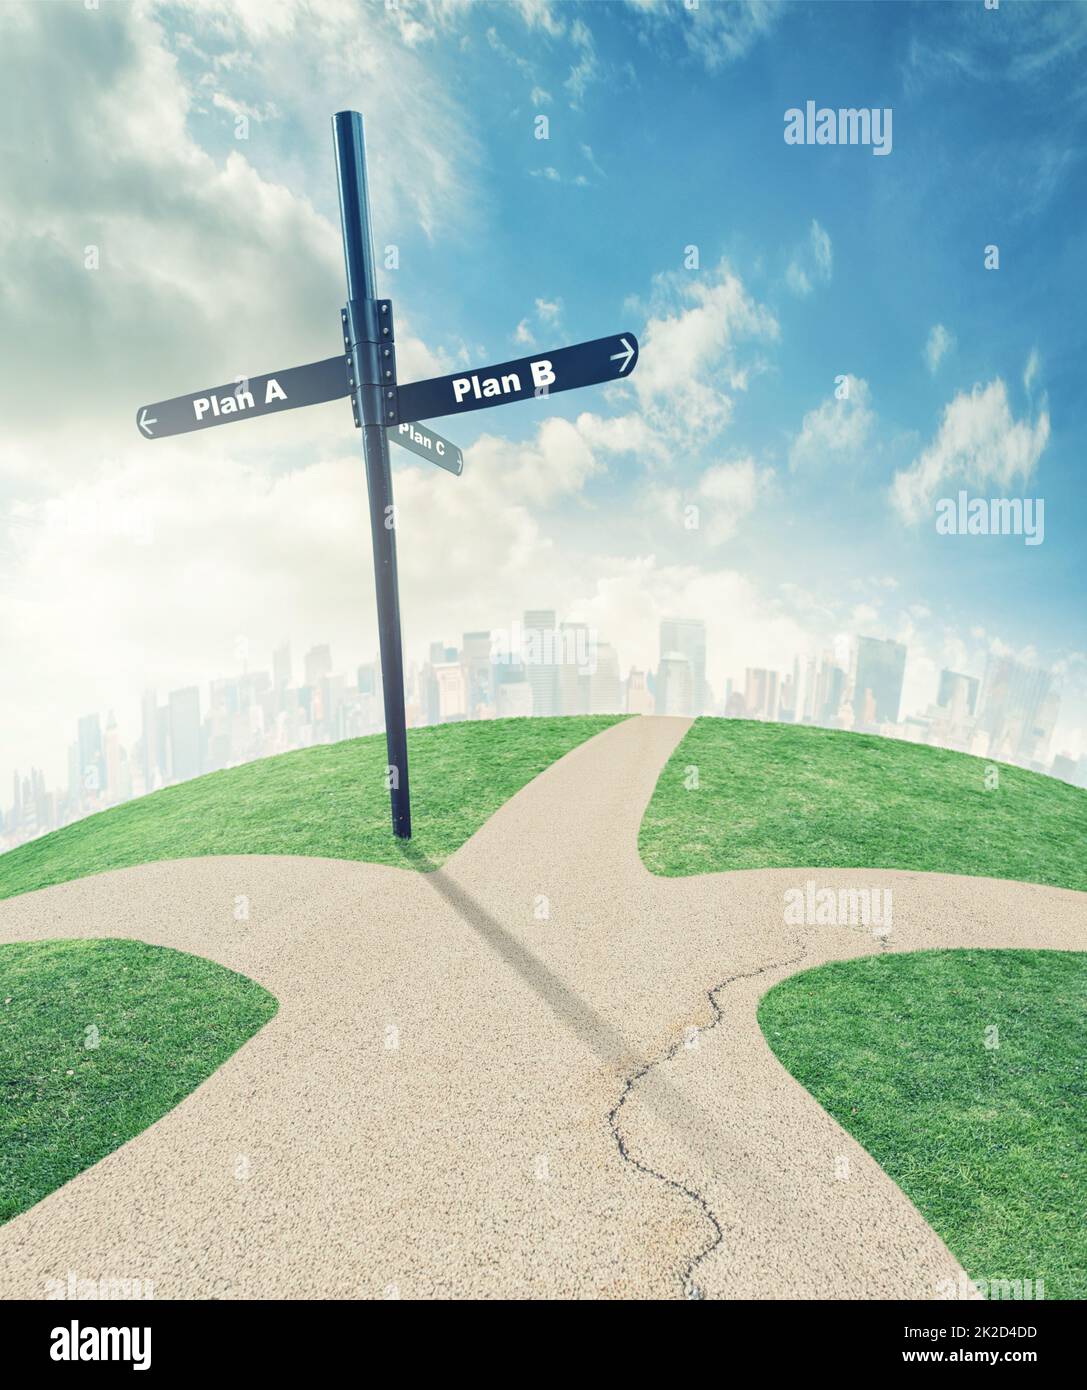 All roads lead to this. Illustration of a road split into directions leading to different plans. Stock Photo